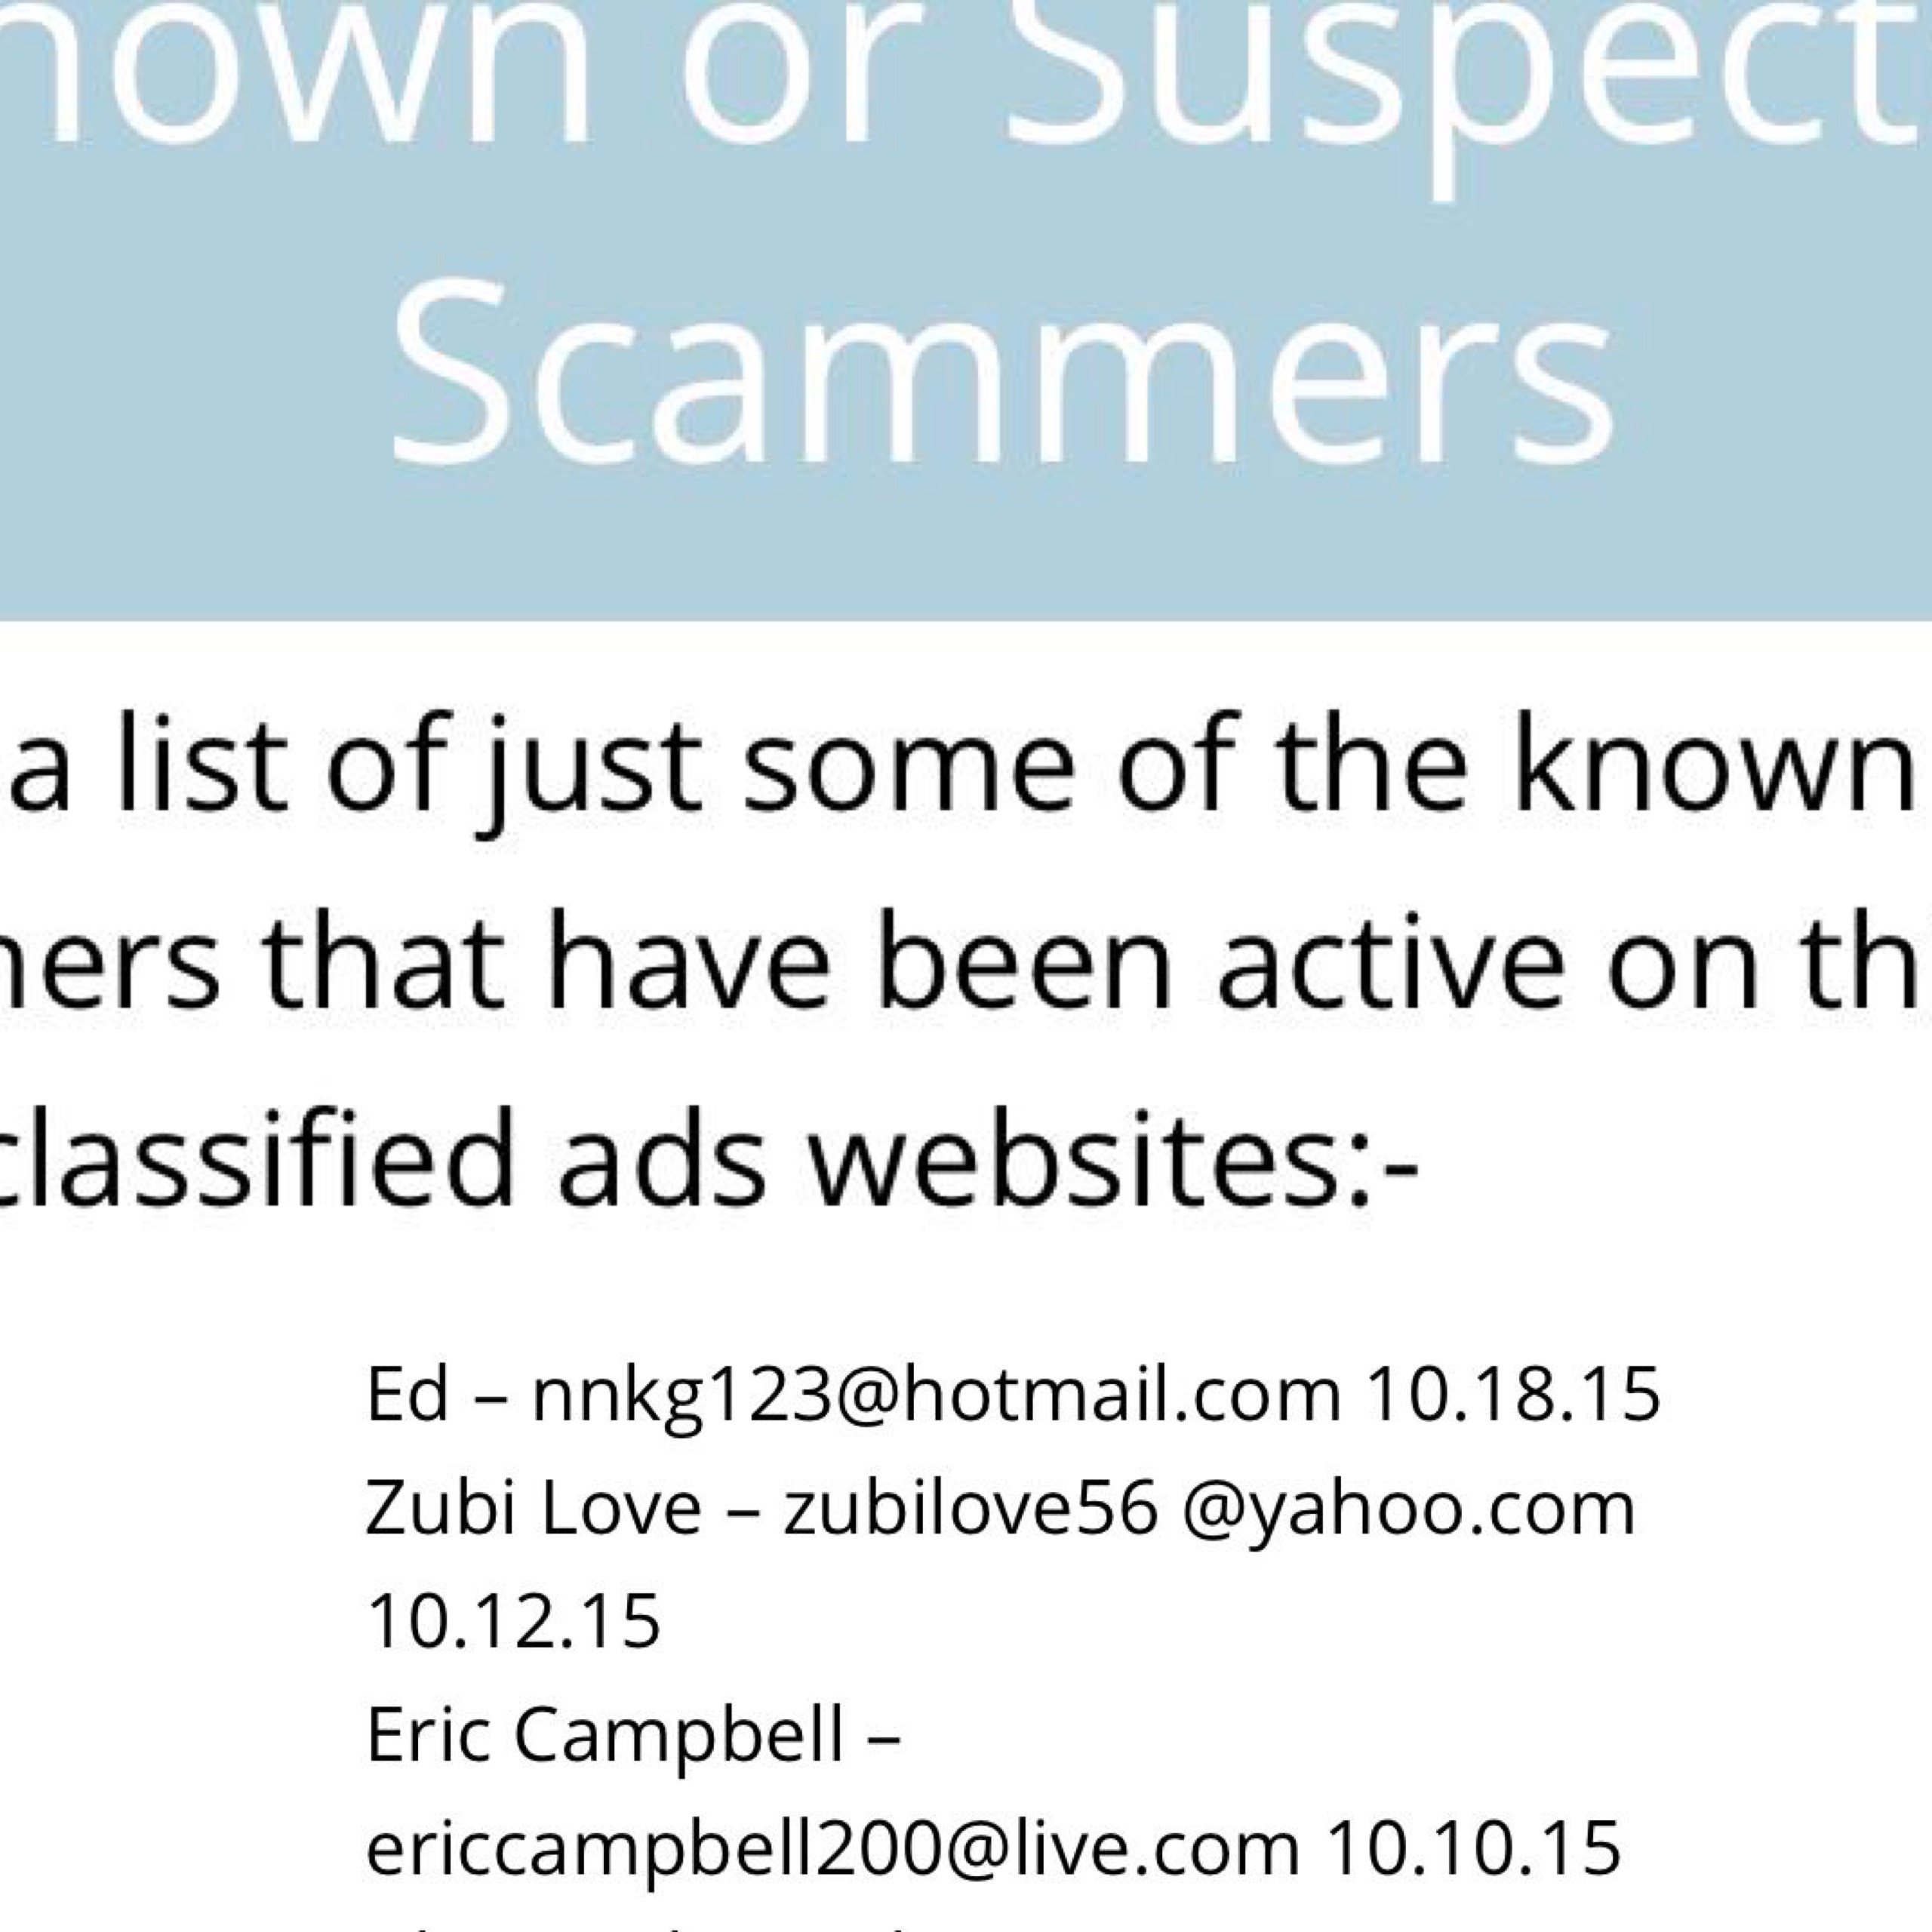 Name is already listed on other sites as a Scam 